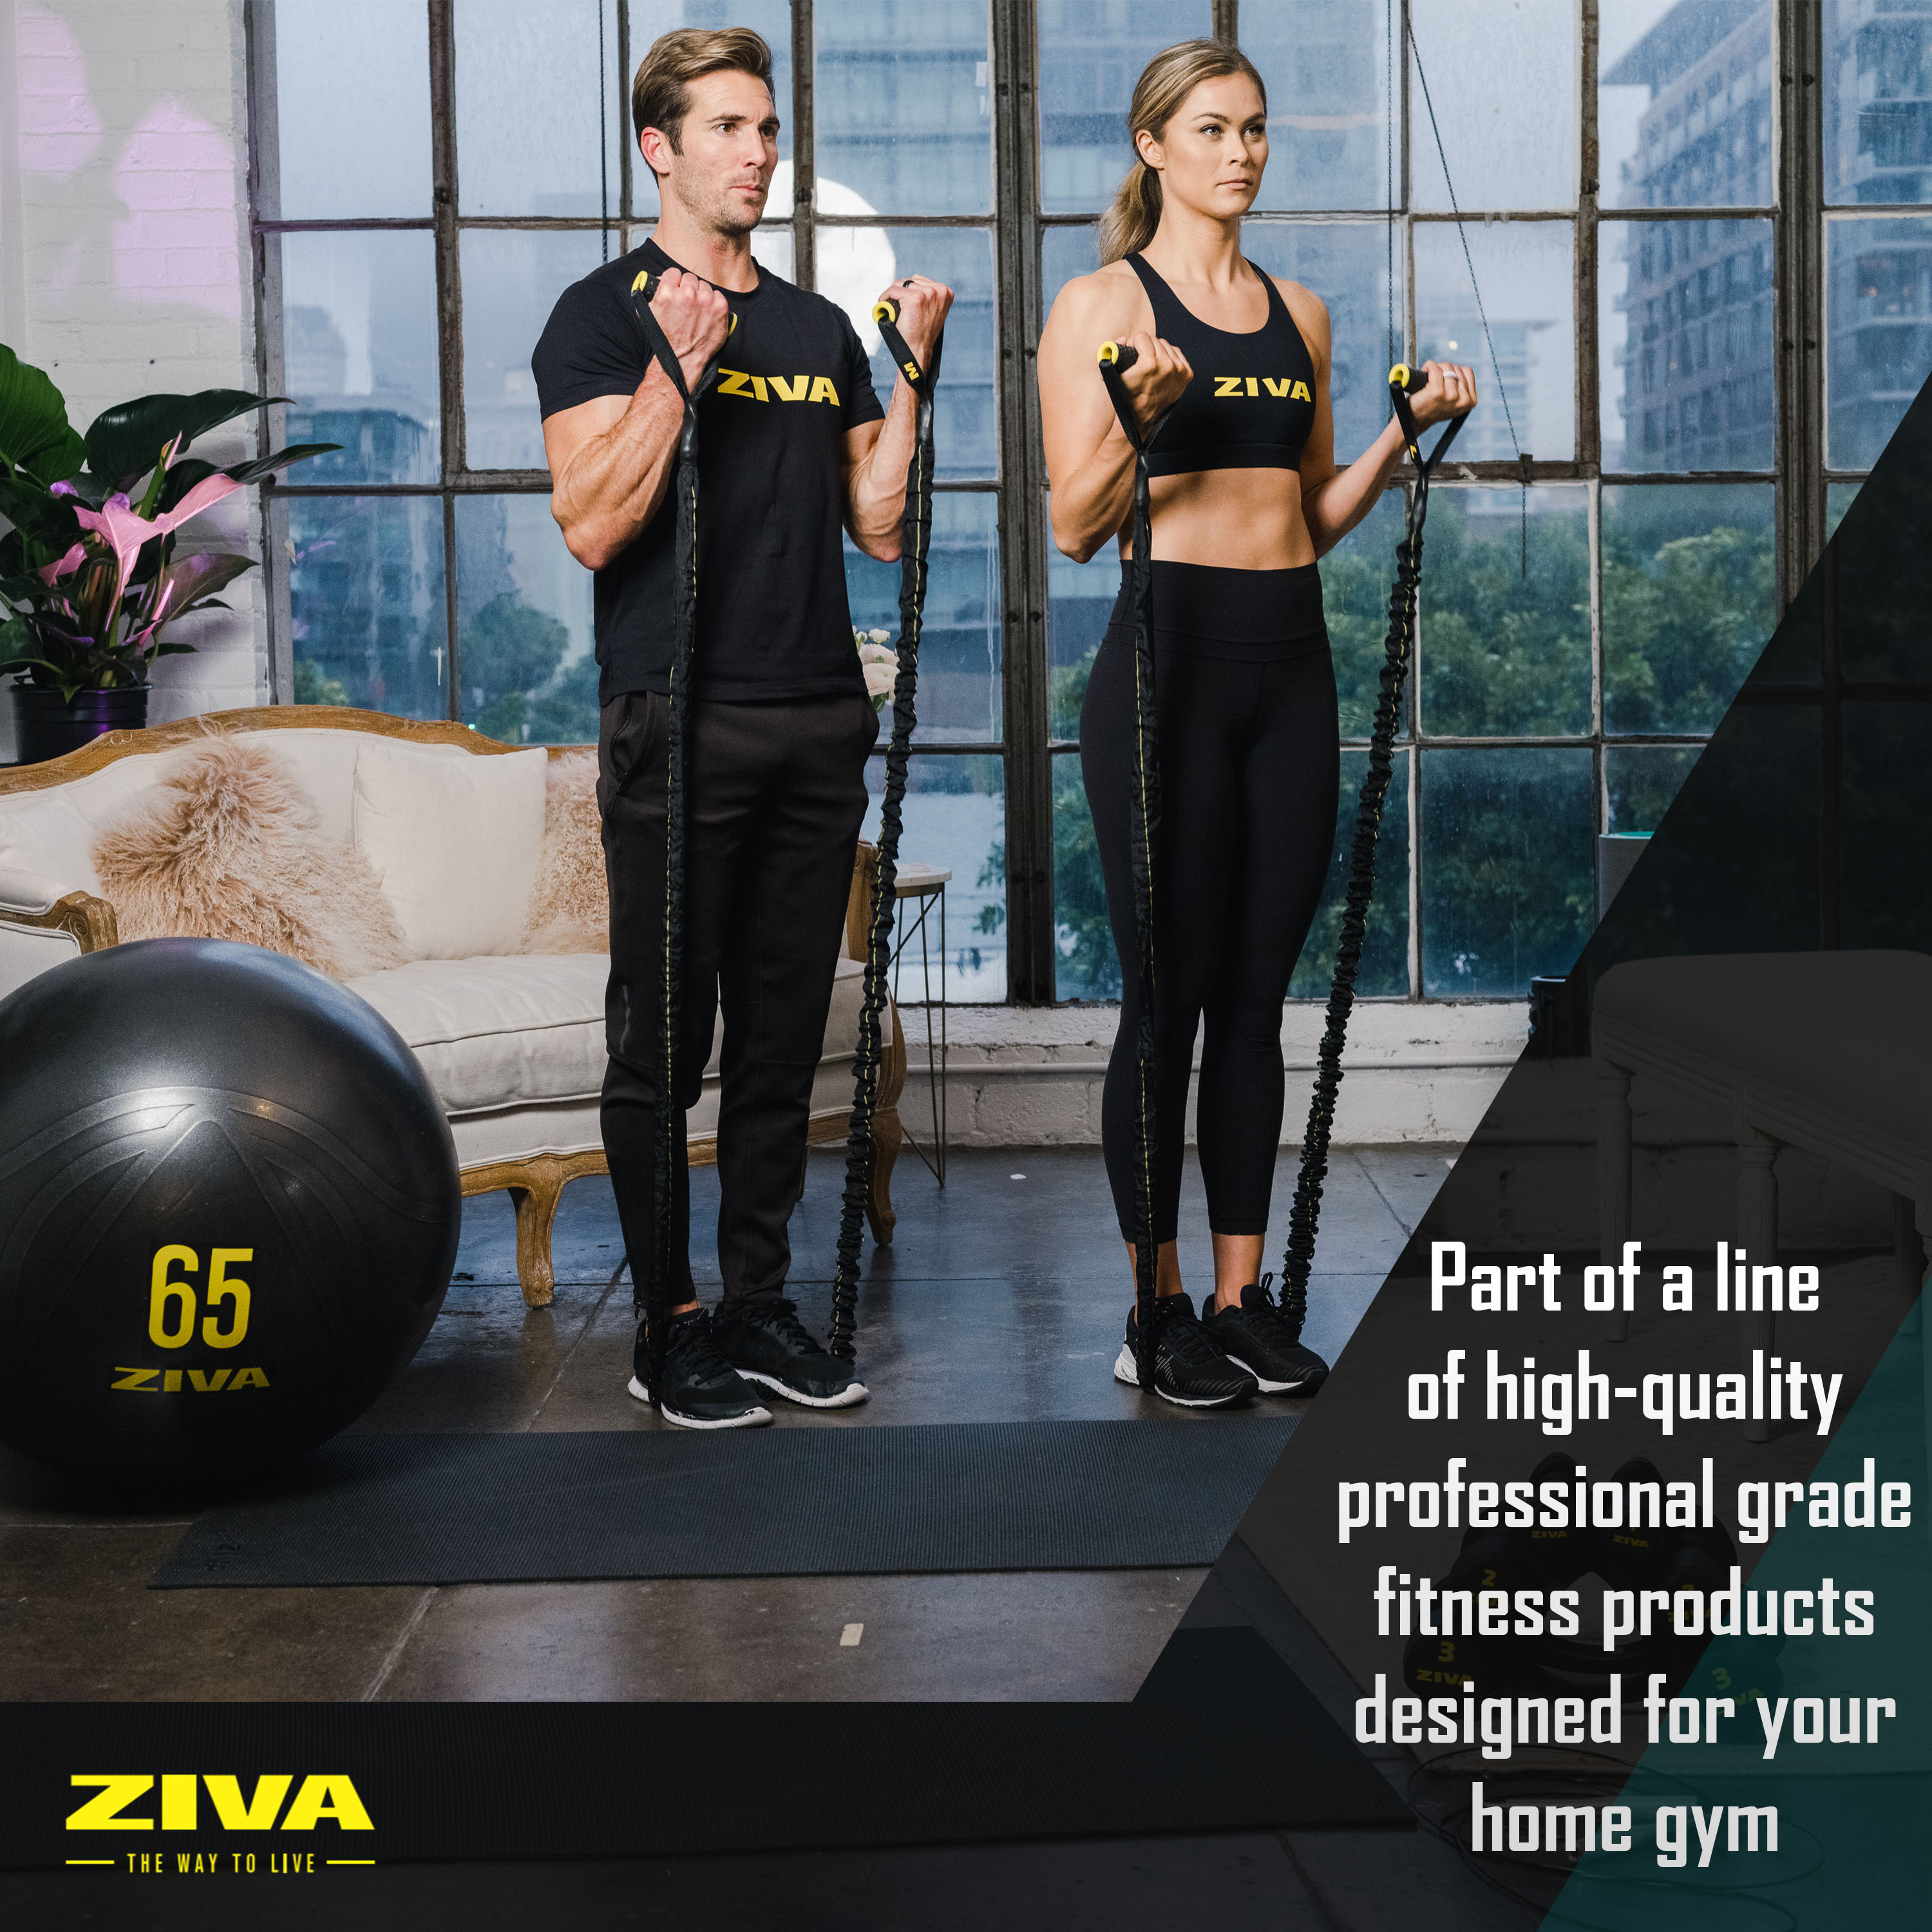 Part of a line of high-quality professional grade fitness products designed for your home gym.